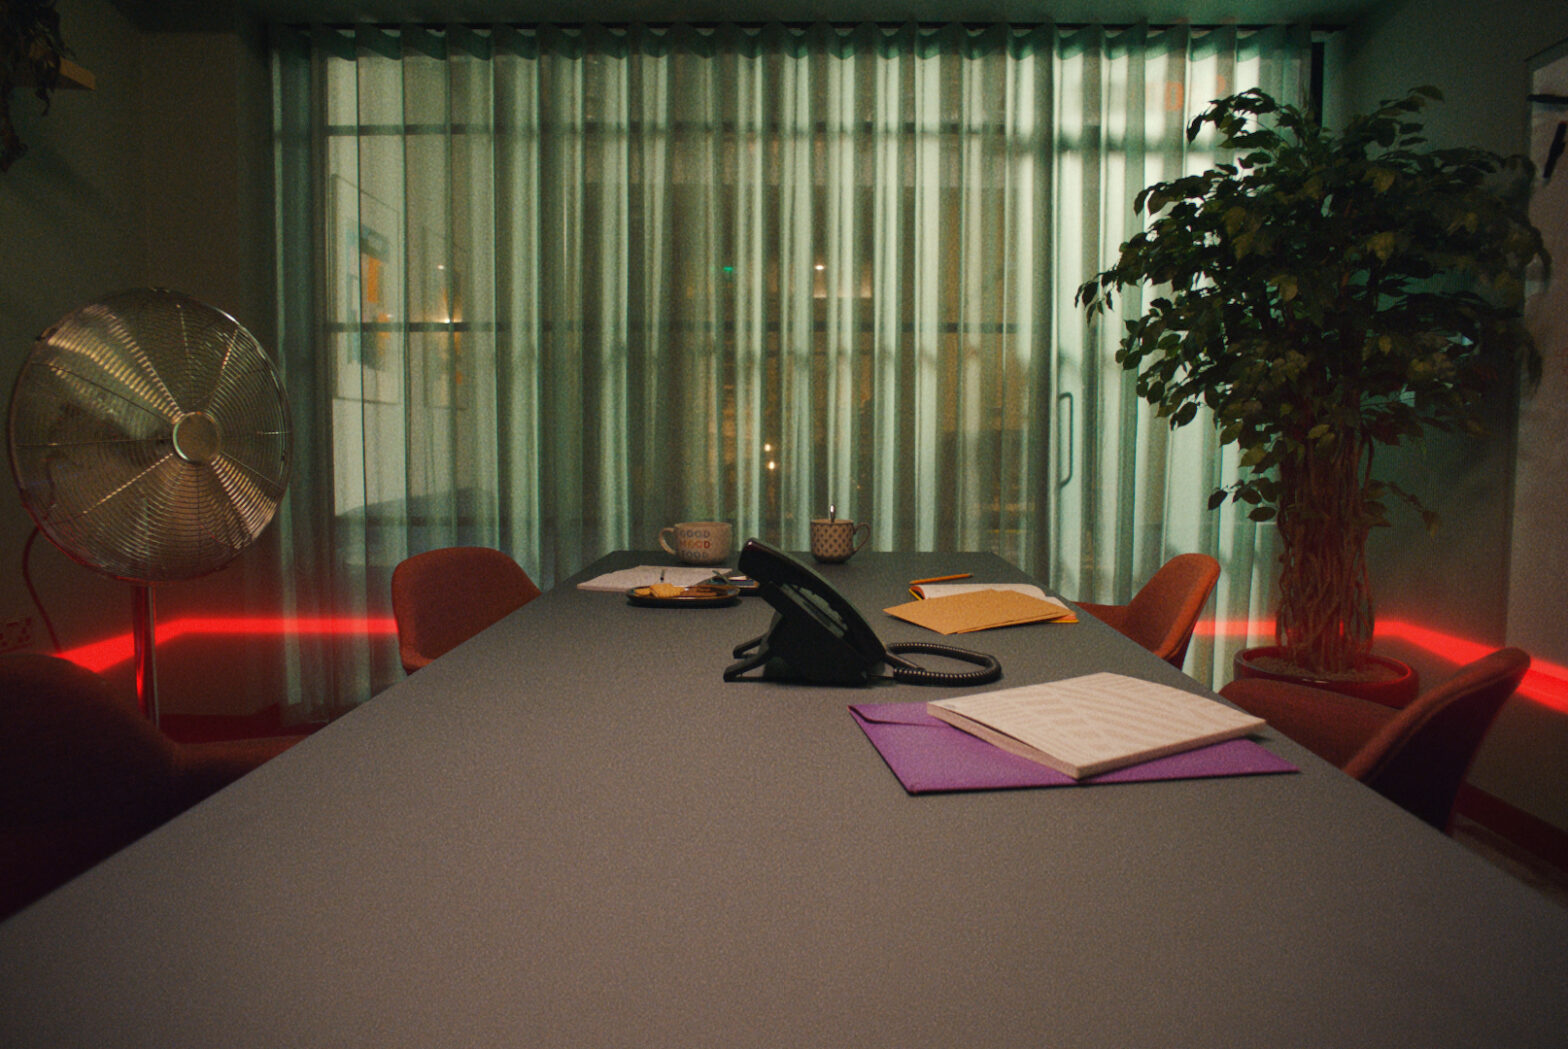 TimeTo campaign uses eerily quiet offices to highlight danger of sexual harassment